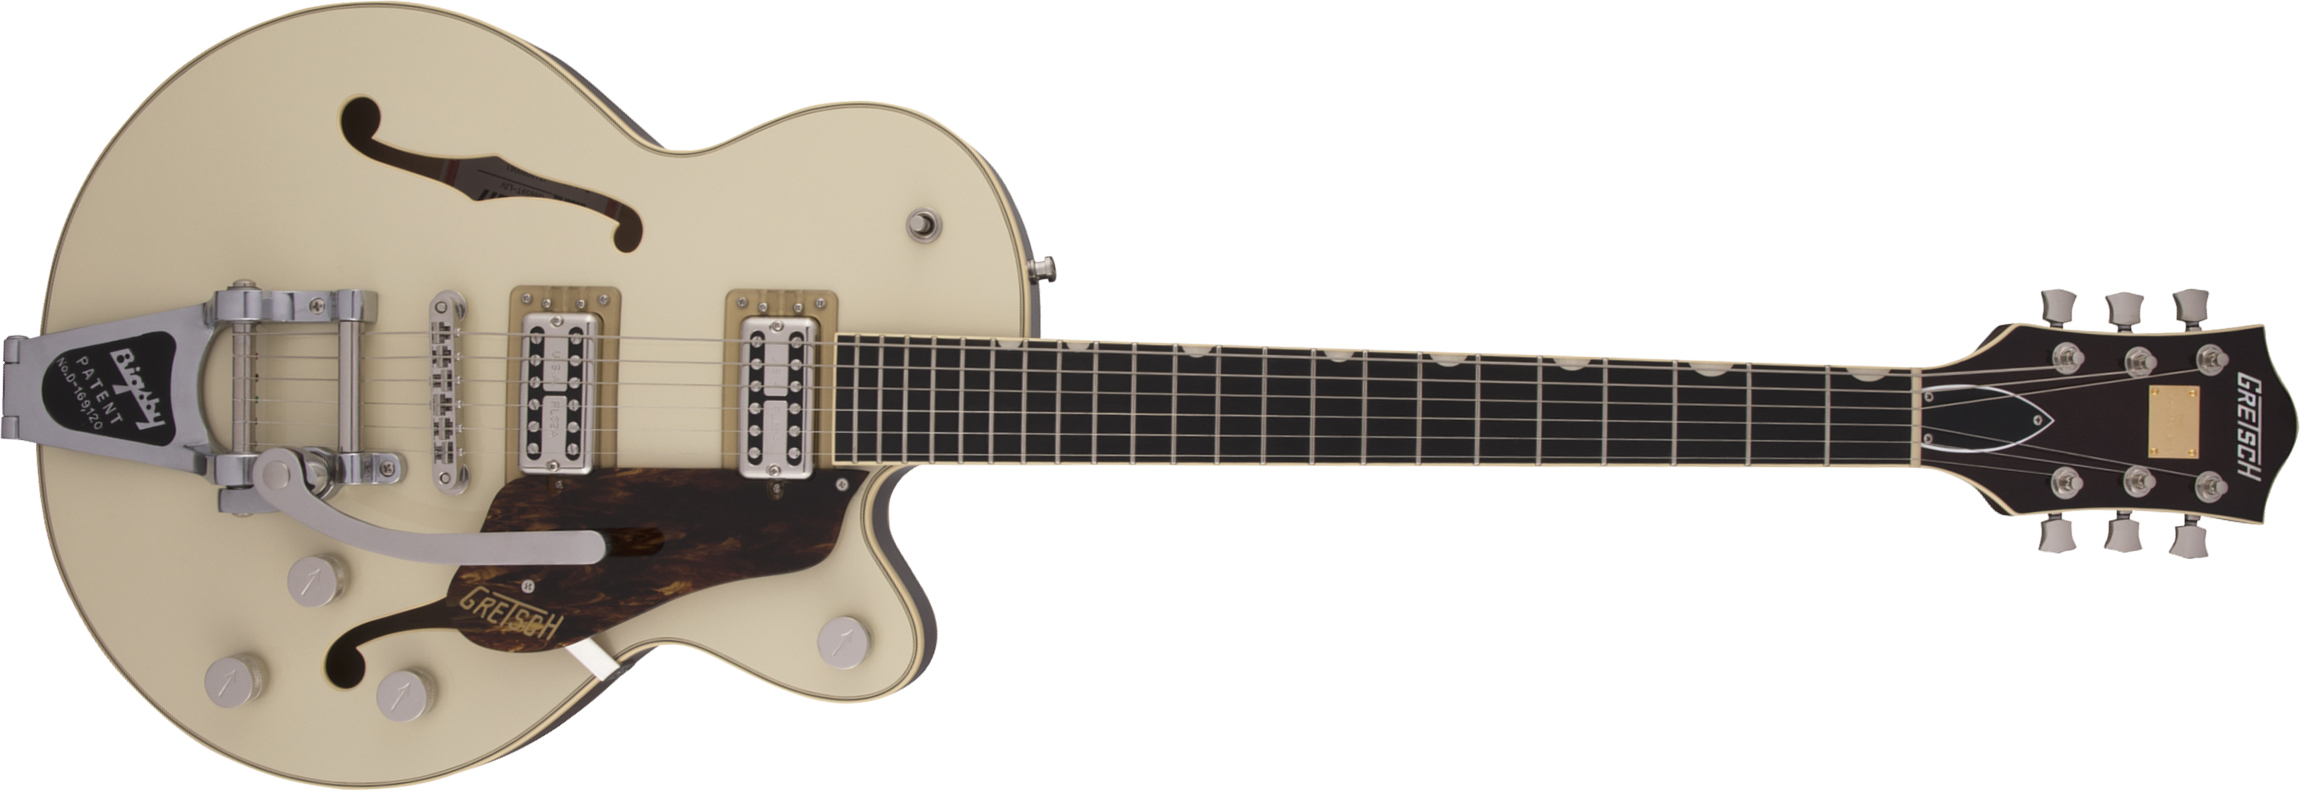 Gretsch G6659t Broadkaster Jr Center Bloc Players Edition Nashville Pro Japon Bigsby Eb - Two-tone Lotus Ivory/walnut Stain - Guitarra eléctrica semi 